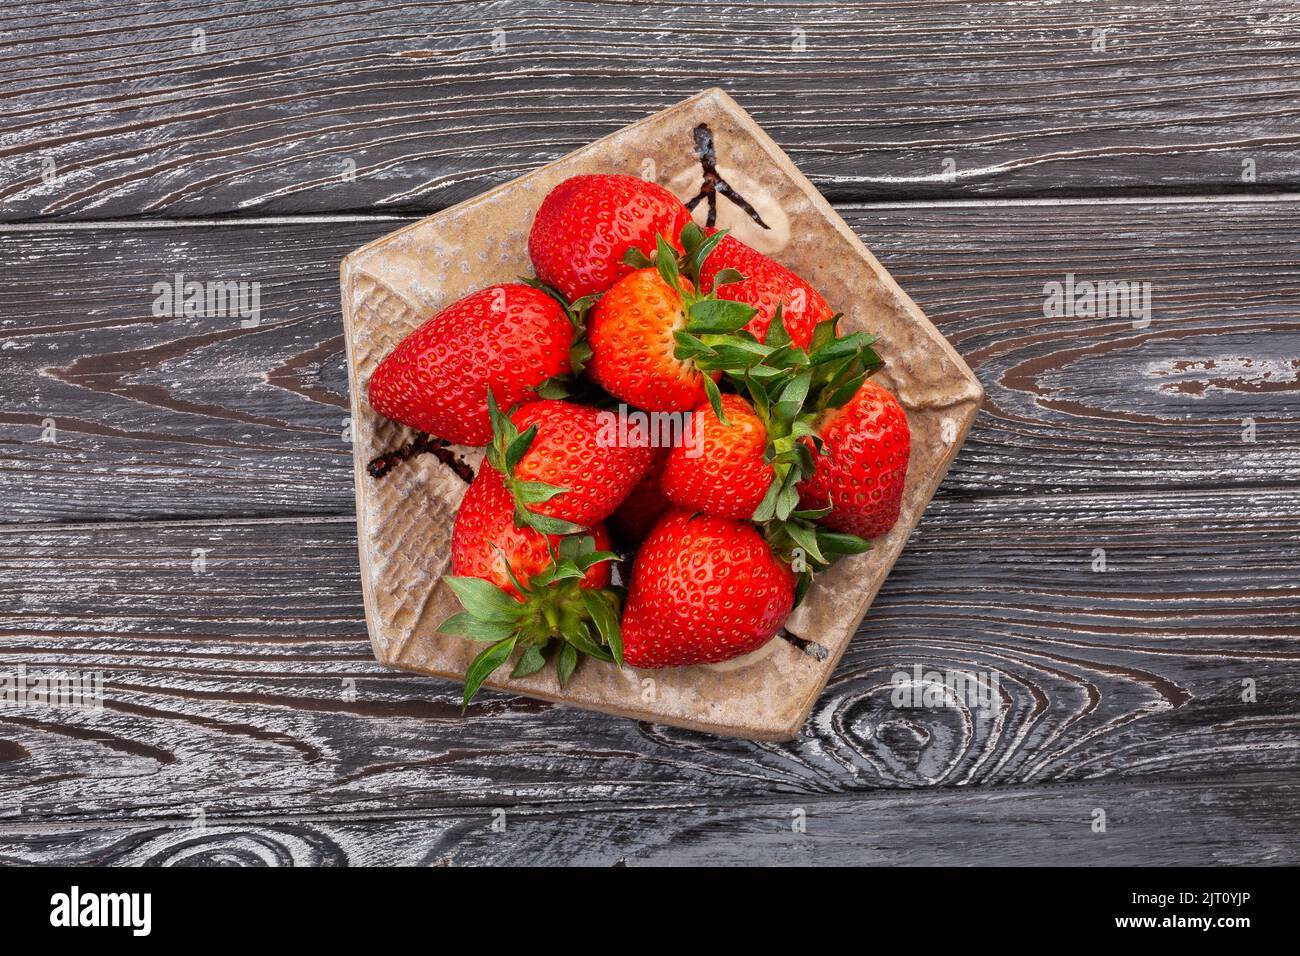 strawberry on a plate on wood background Stock Photo